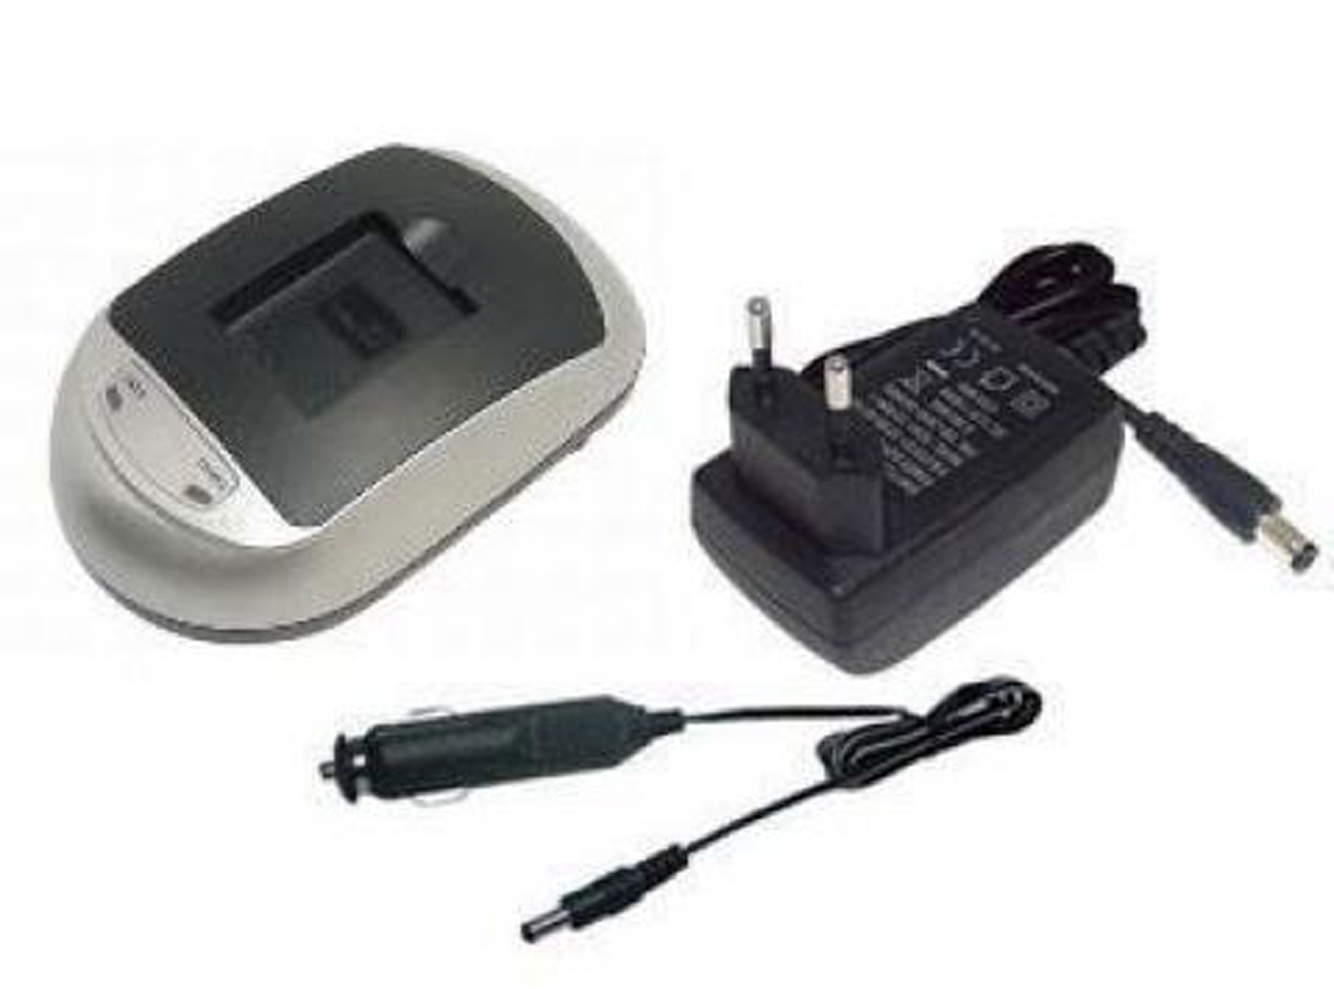 Olympus 200483, Li-30b Battery Chargers For Olympus Stylus Verve Digital, Olympus Stylus Verve Digital S replacement